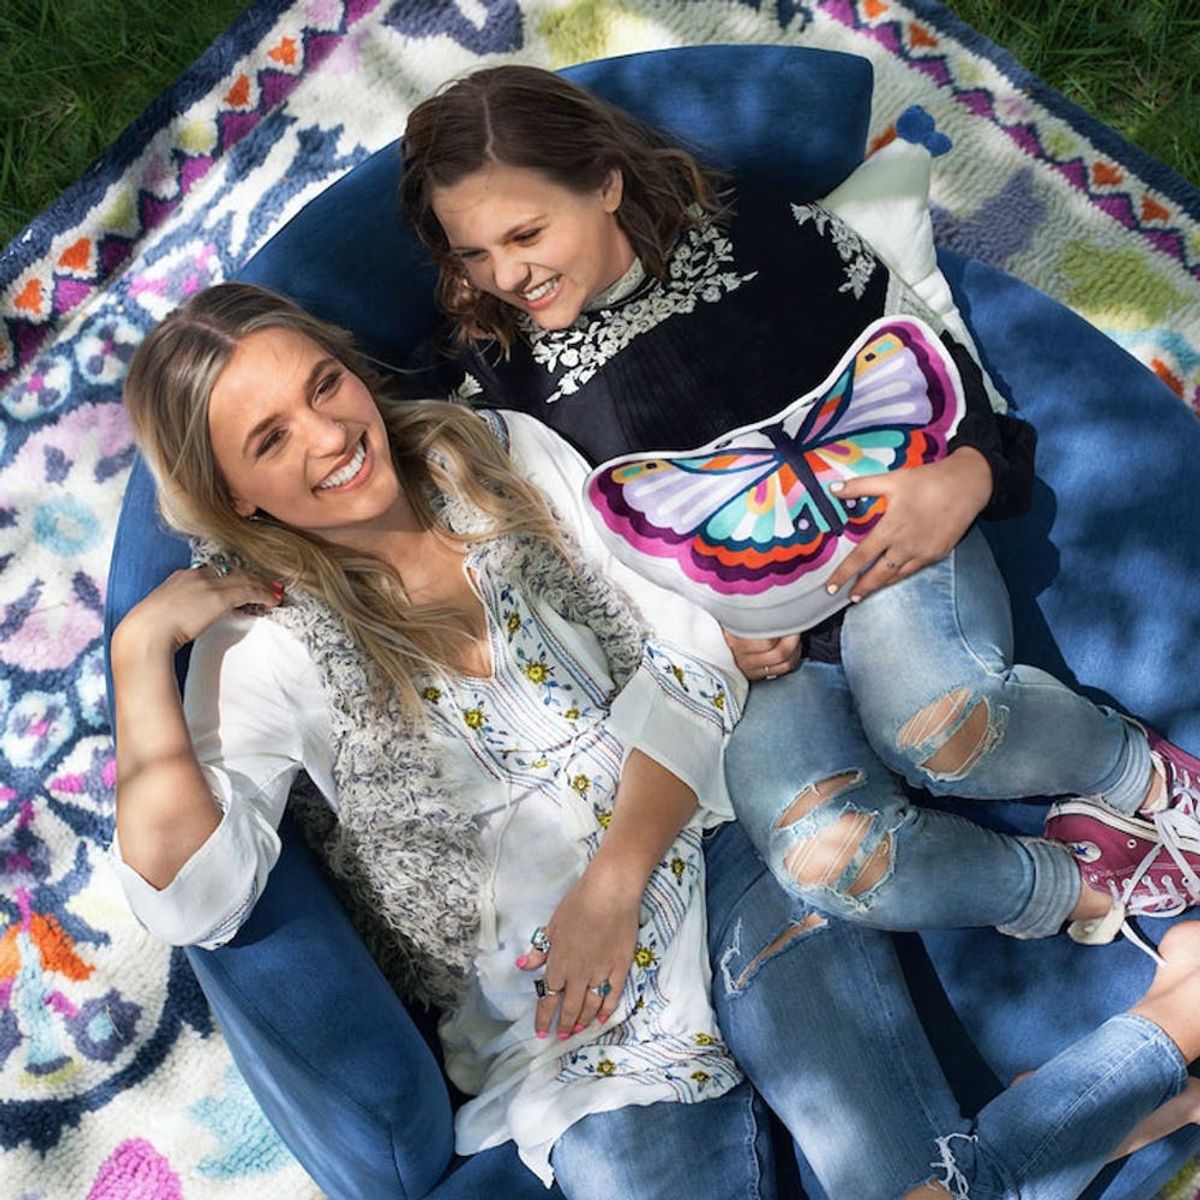 Lennon and Maisy’s PB Teen Collab Will Take Your Breath Away